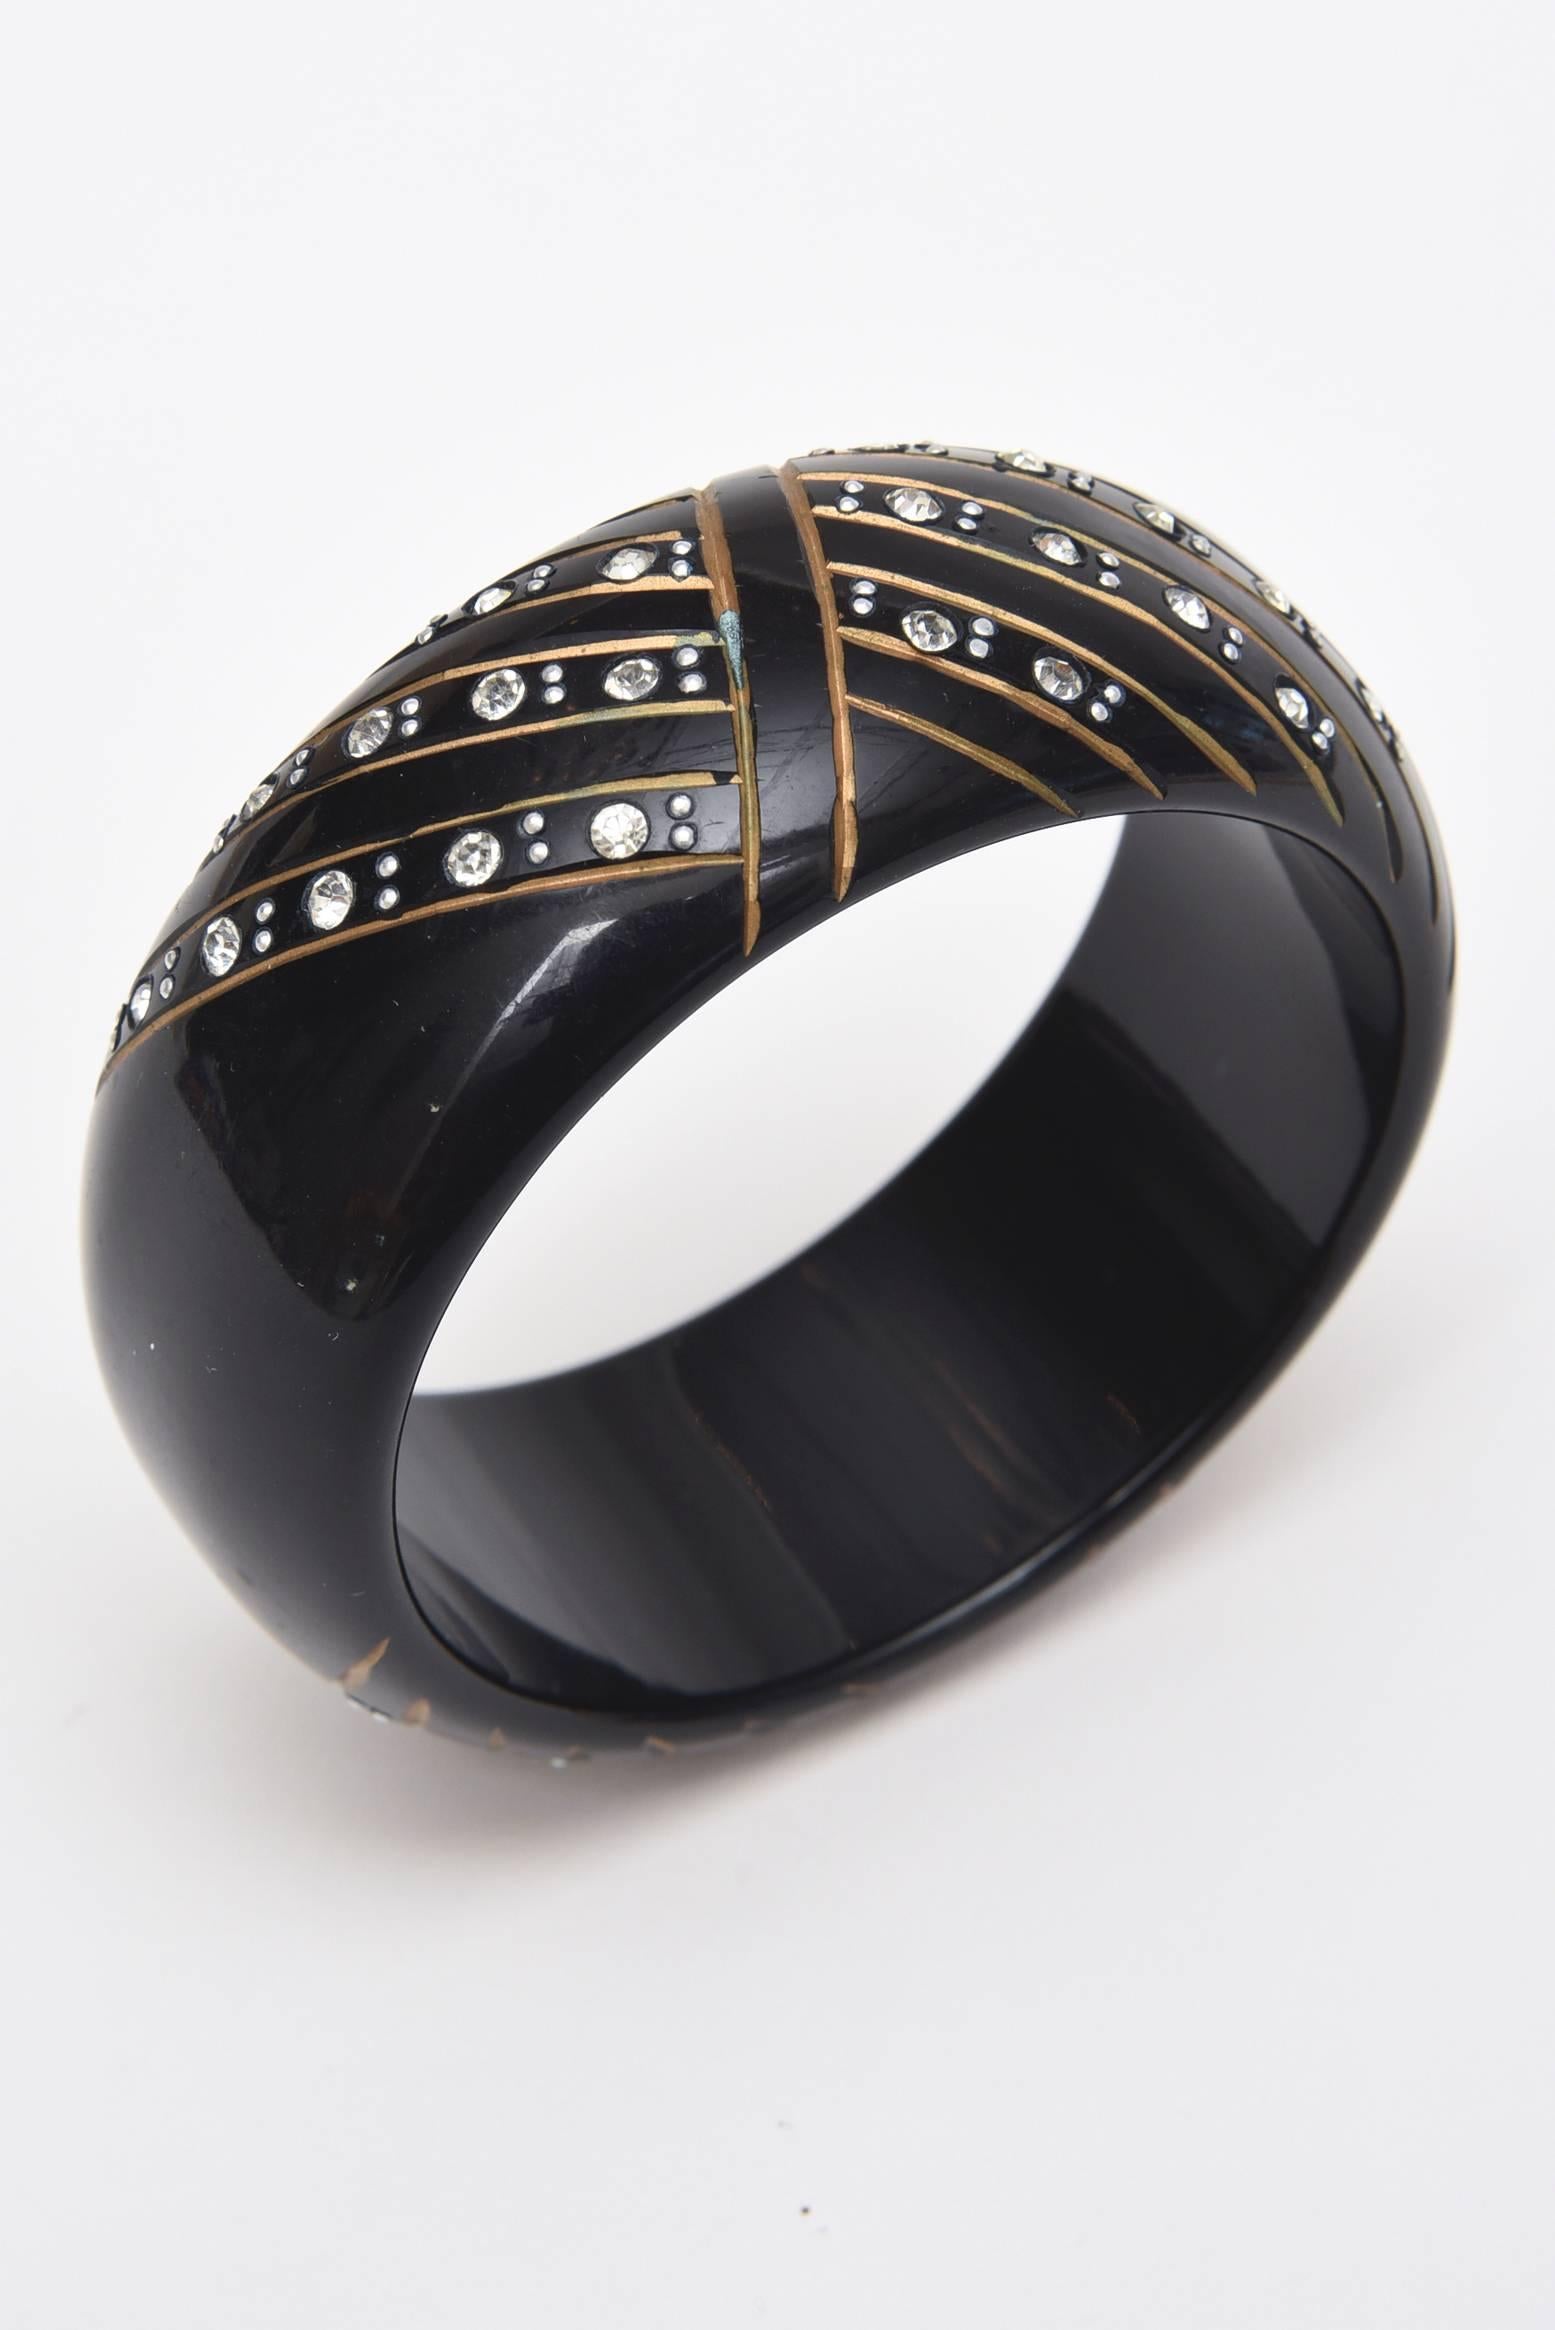 This art deco inspired design of this french resin and rhinestone thick bangle bracelet is timeless and dramatic. It is modern yet resides in a time past.
It is from the 80's. It is wider than most for these resin bracelets.
